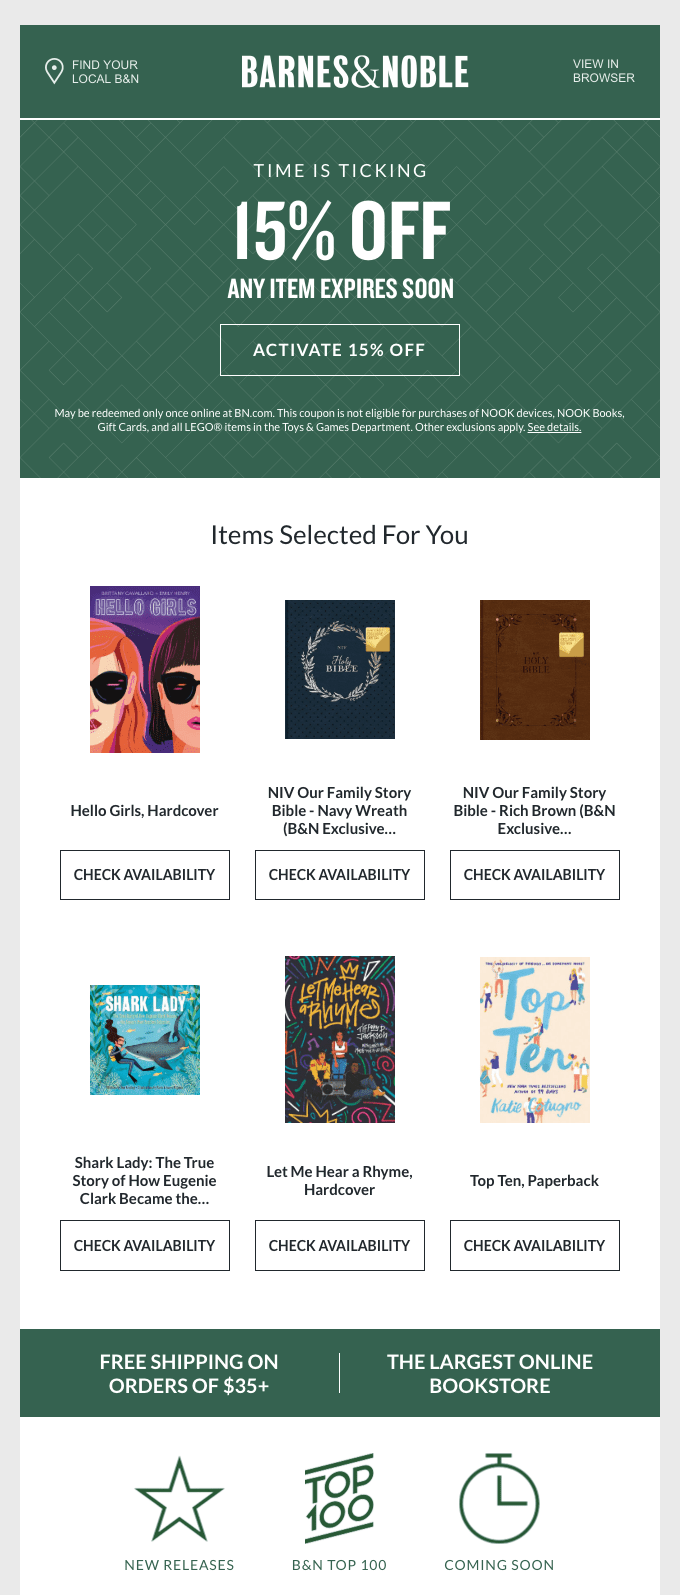 Barnes & Noble Cross-Selling Email